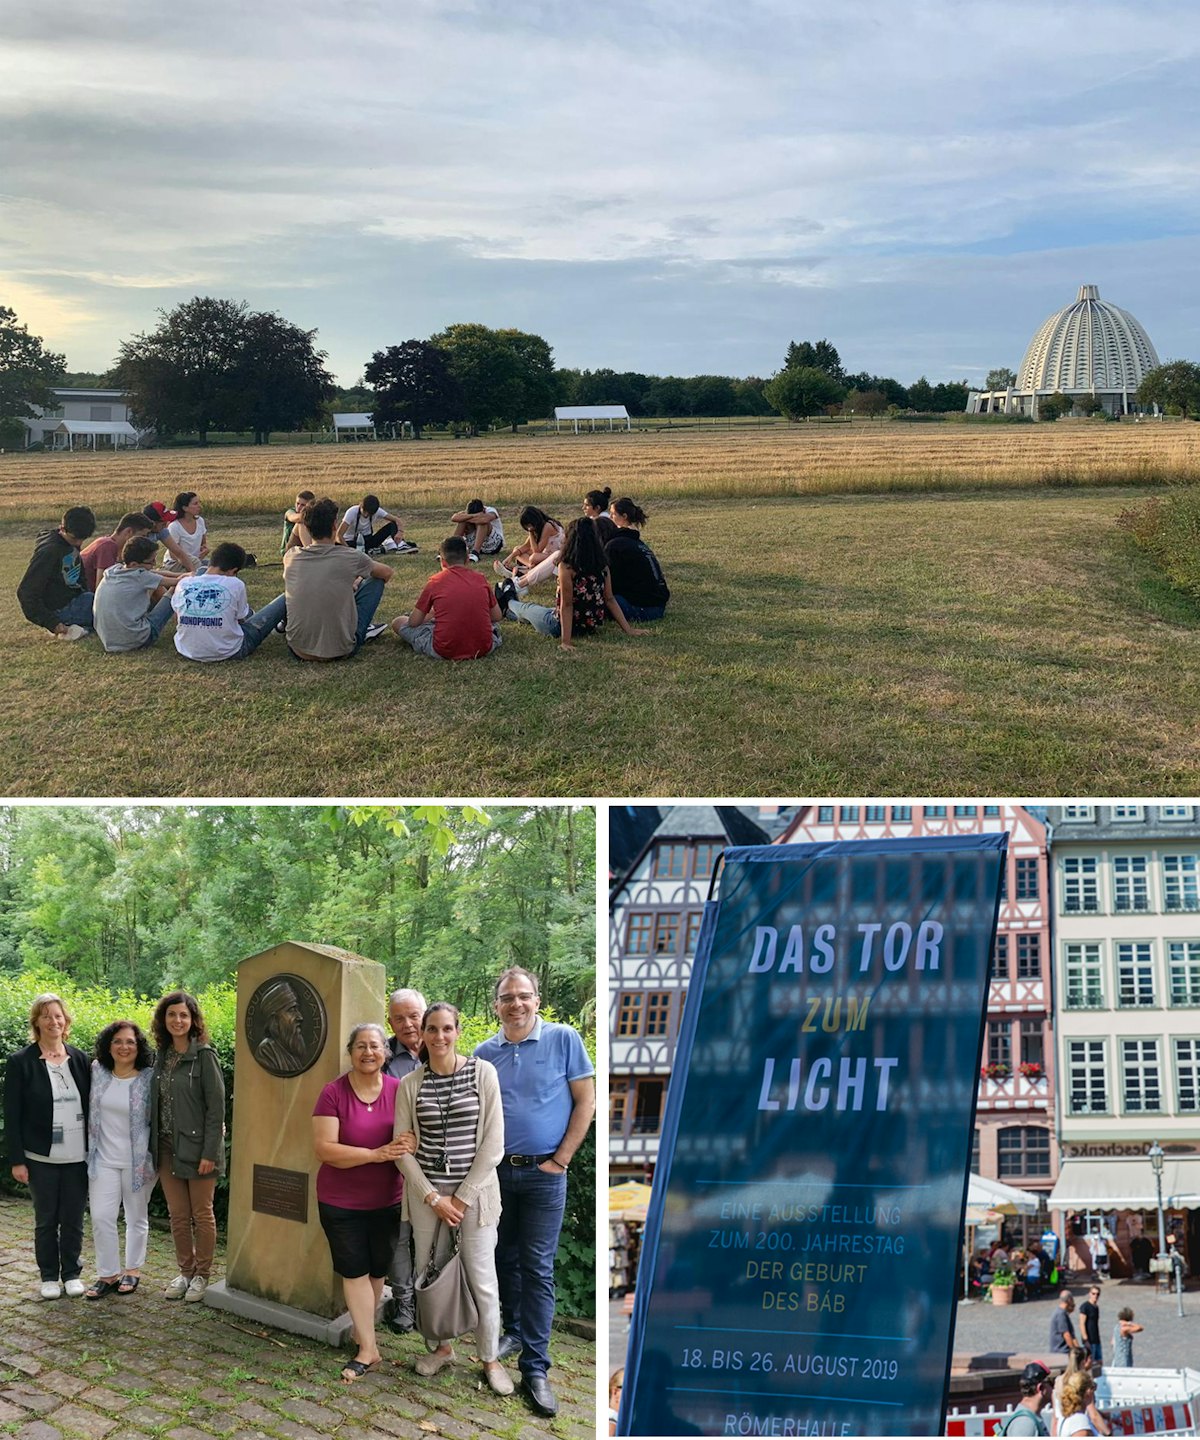 Germany’s Baha’is have undertaken numerous steps to prepare for the upcoming bicentenary. Recent efforts include storytelling gatherings to bring the early history of the Faith to life, a group’s visit to a small town that has memorialized ‘Abdu’l-Baha’s visit there in 1913, and a growing number of young people arising to serve their neighborhoods.